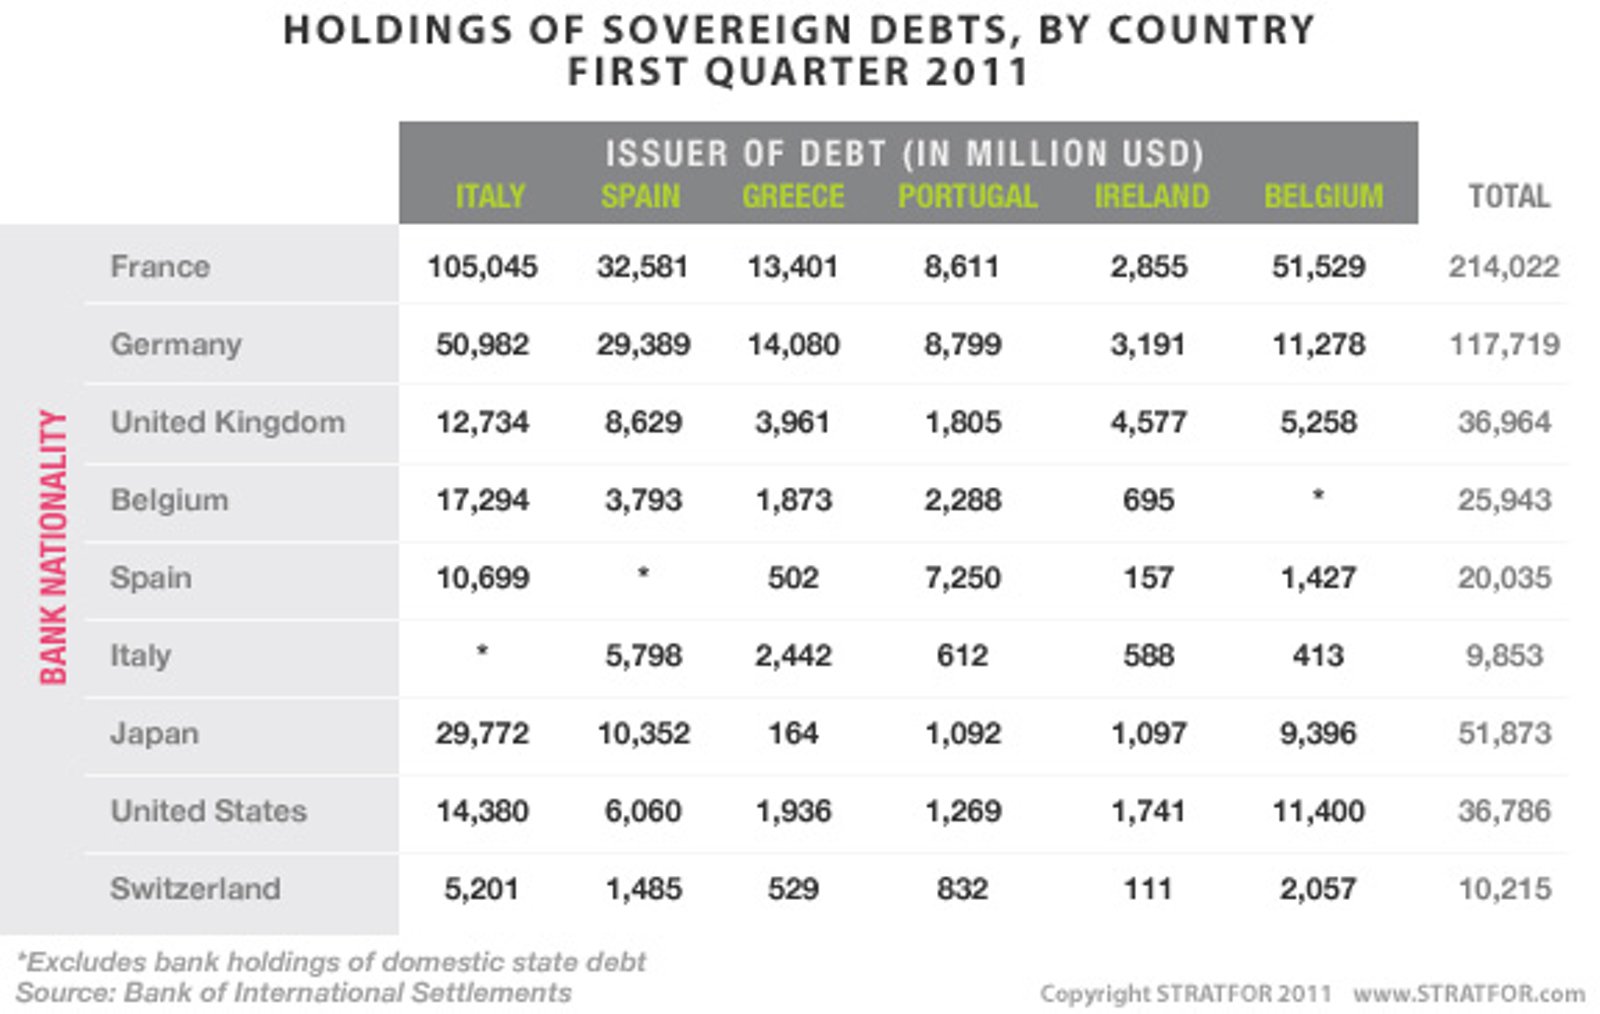 http://einarbb.blog.is/users/72/einarbb/img/holdings_of_sovereign_debts_by_country_-_first_quarter_2011.jpg